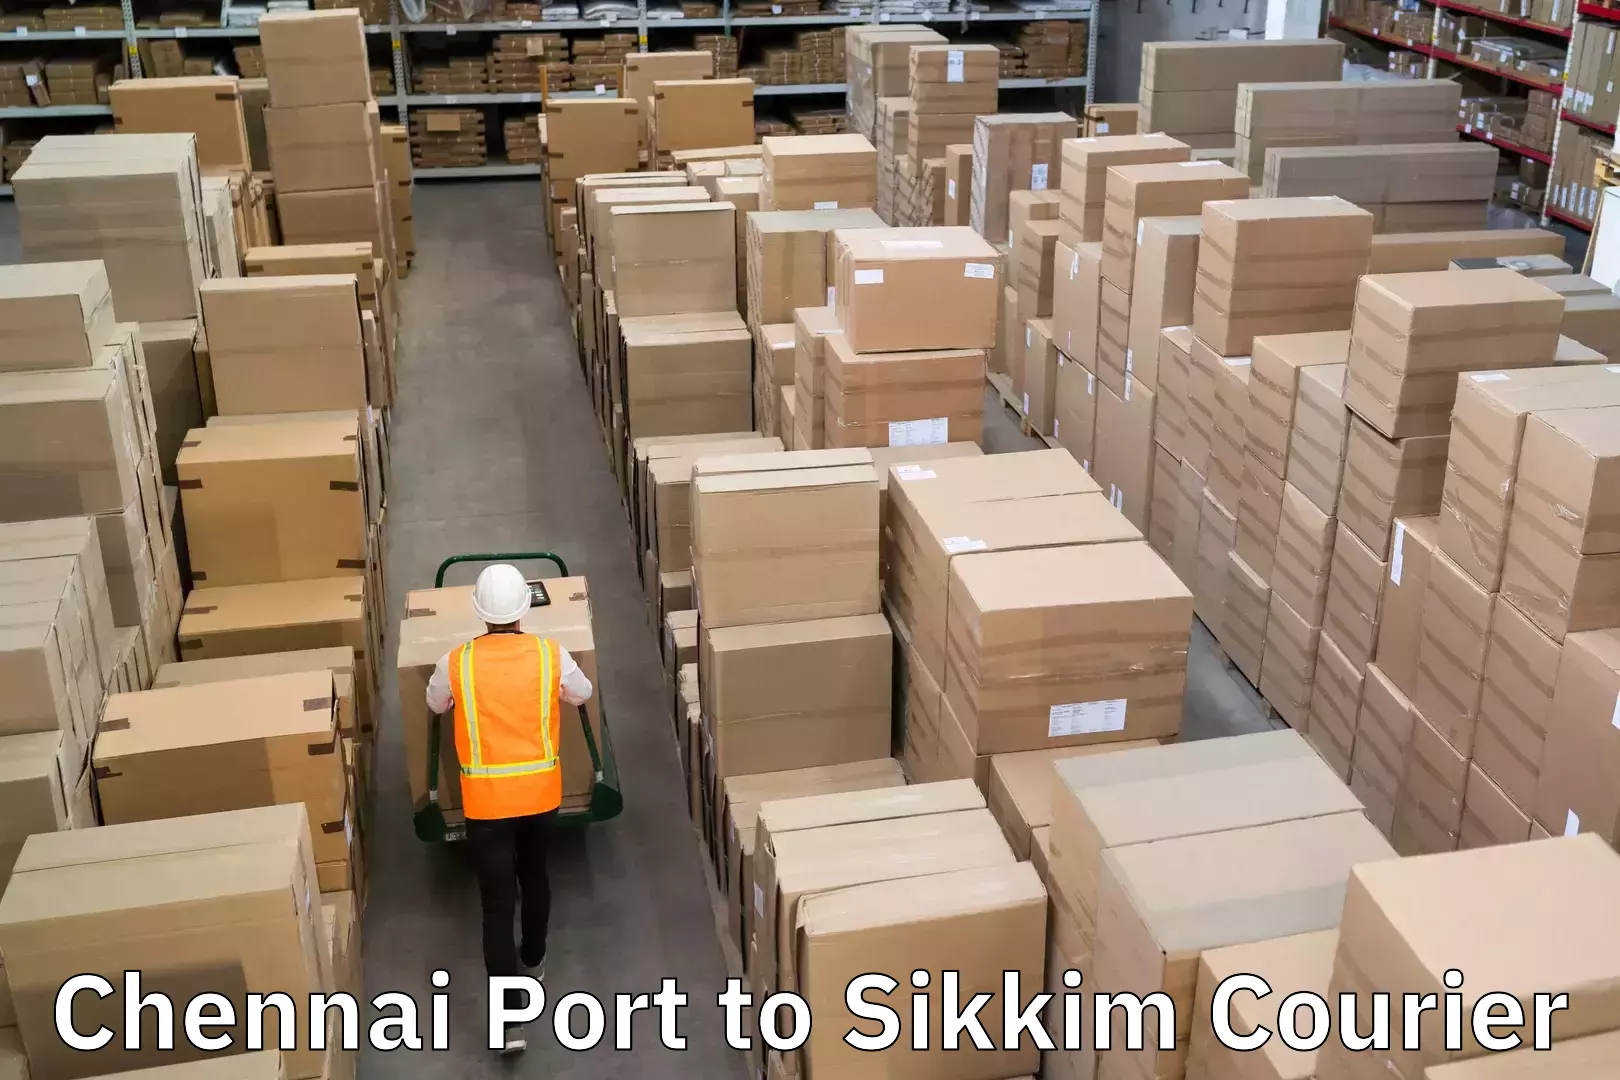 Courier service partnerships Chennai Port to Sikkim